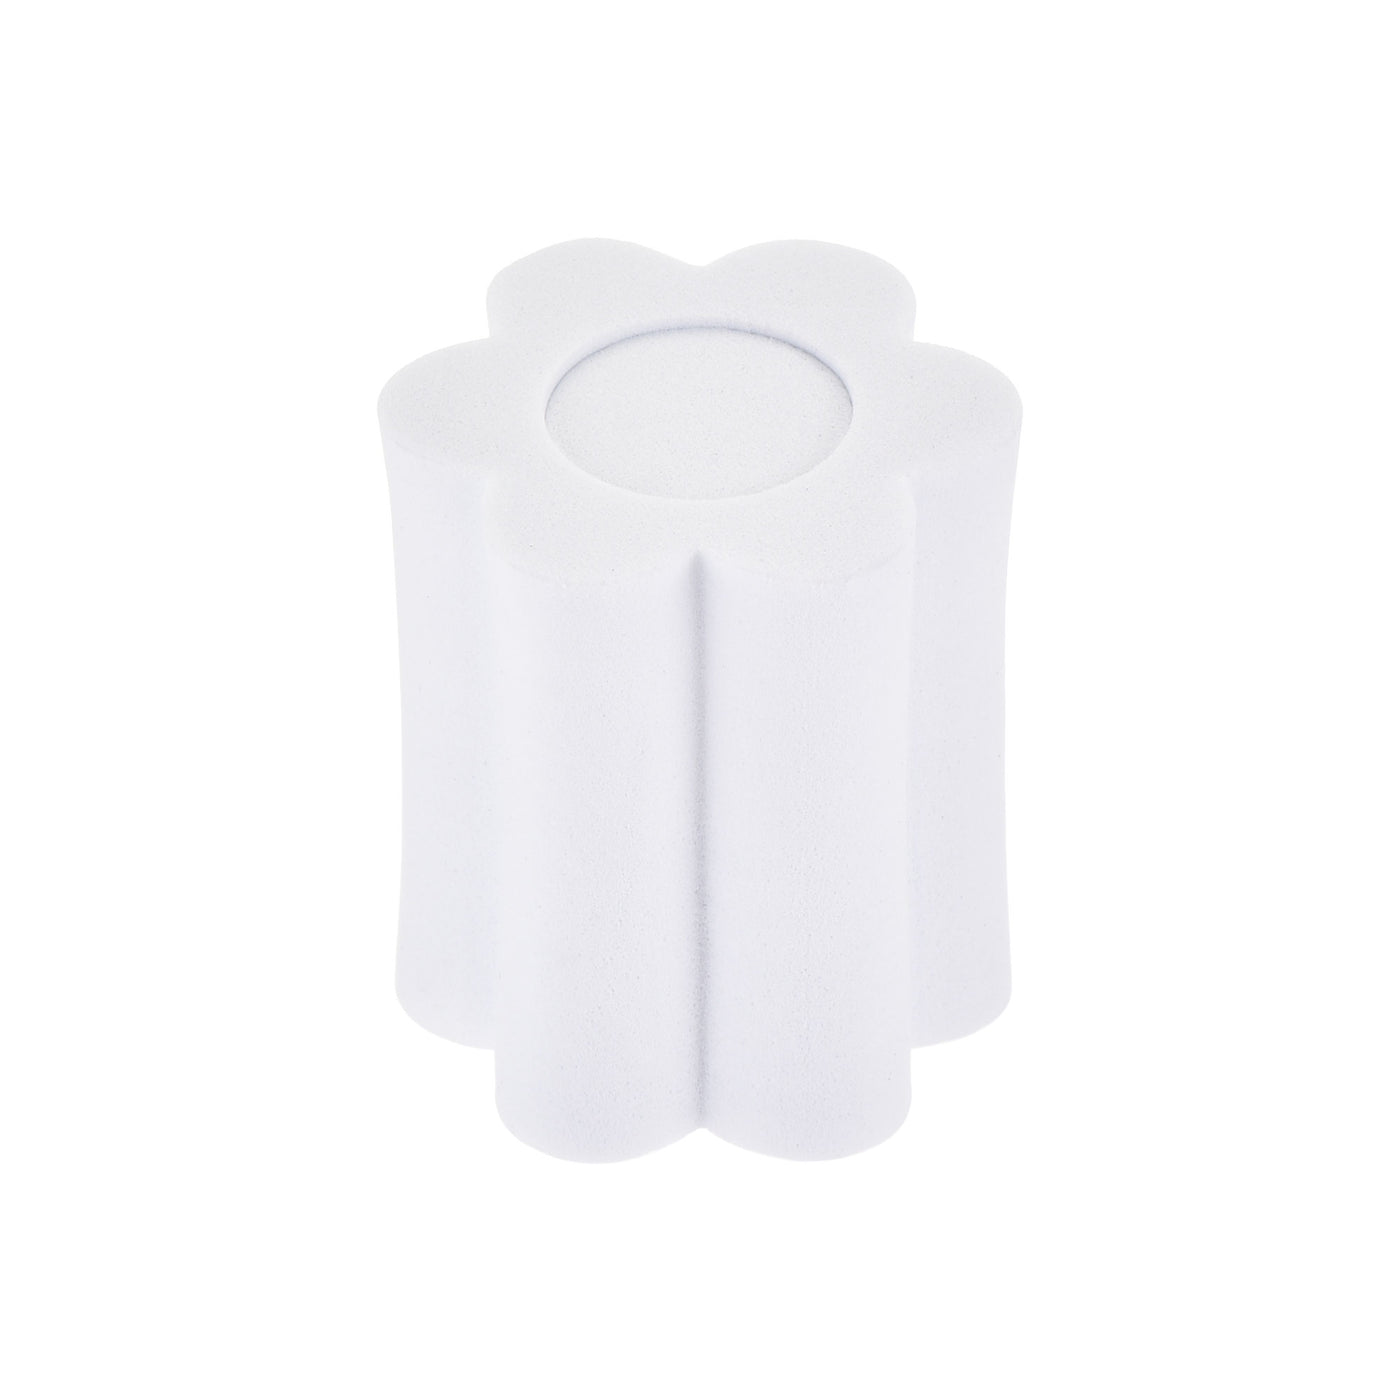 Uxcell Uxcell Cup Turner Foam 1.57 Inch Diameter Foam Inserts White for 3/4 Inch PVC Pipe 4Pcs